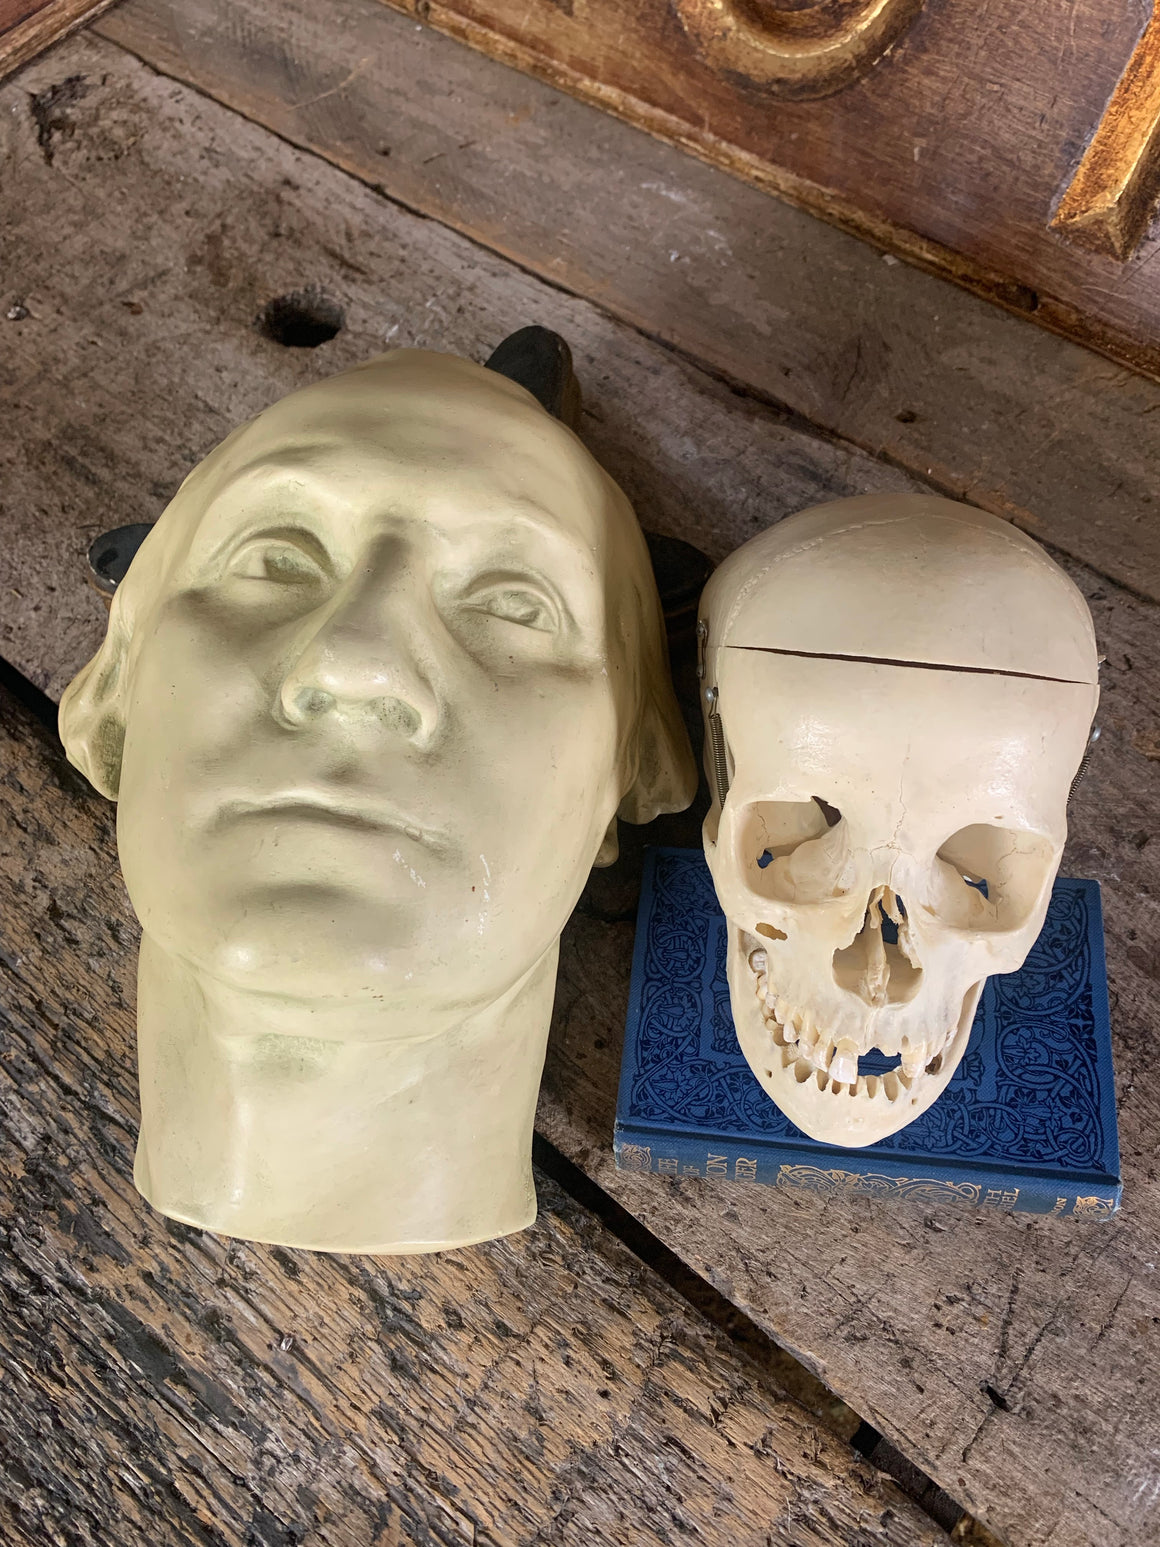 A life mask of George Washington after the antique by Houdon